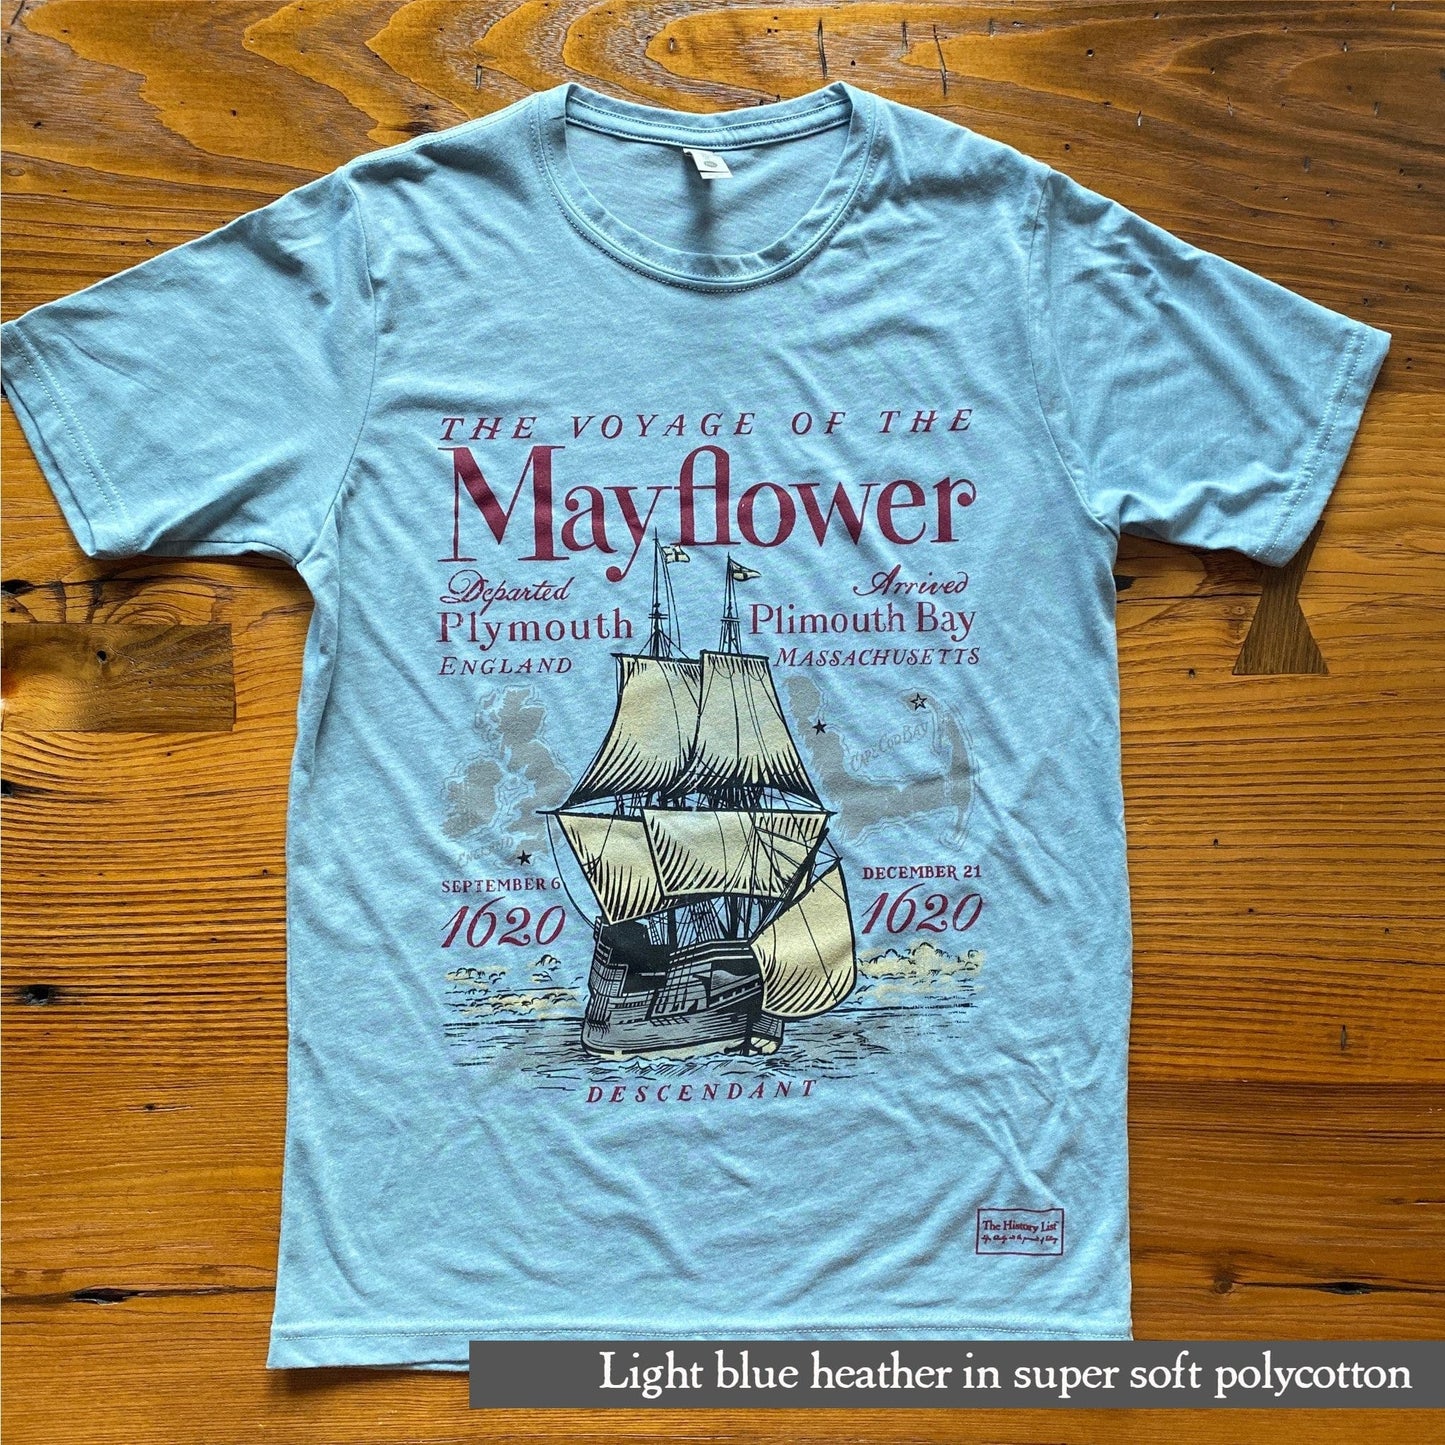 Light Blue Heather - "The Voyage of the Mayflower" Shirt from the history list store